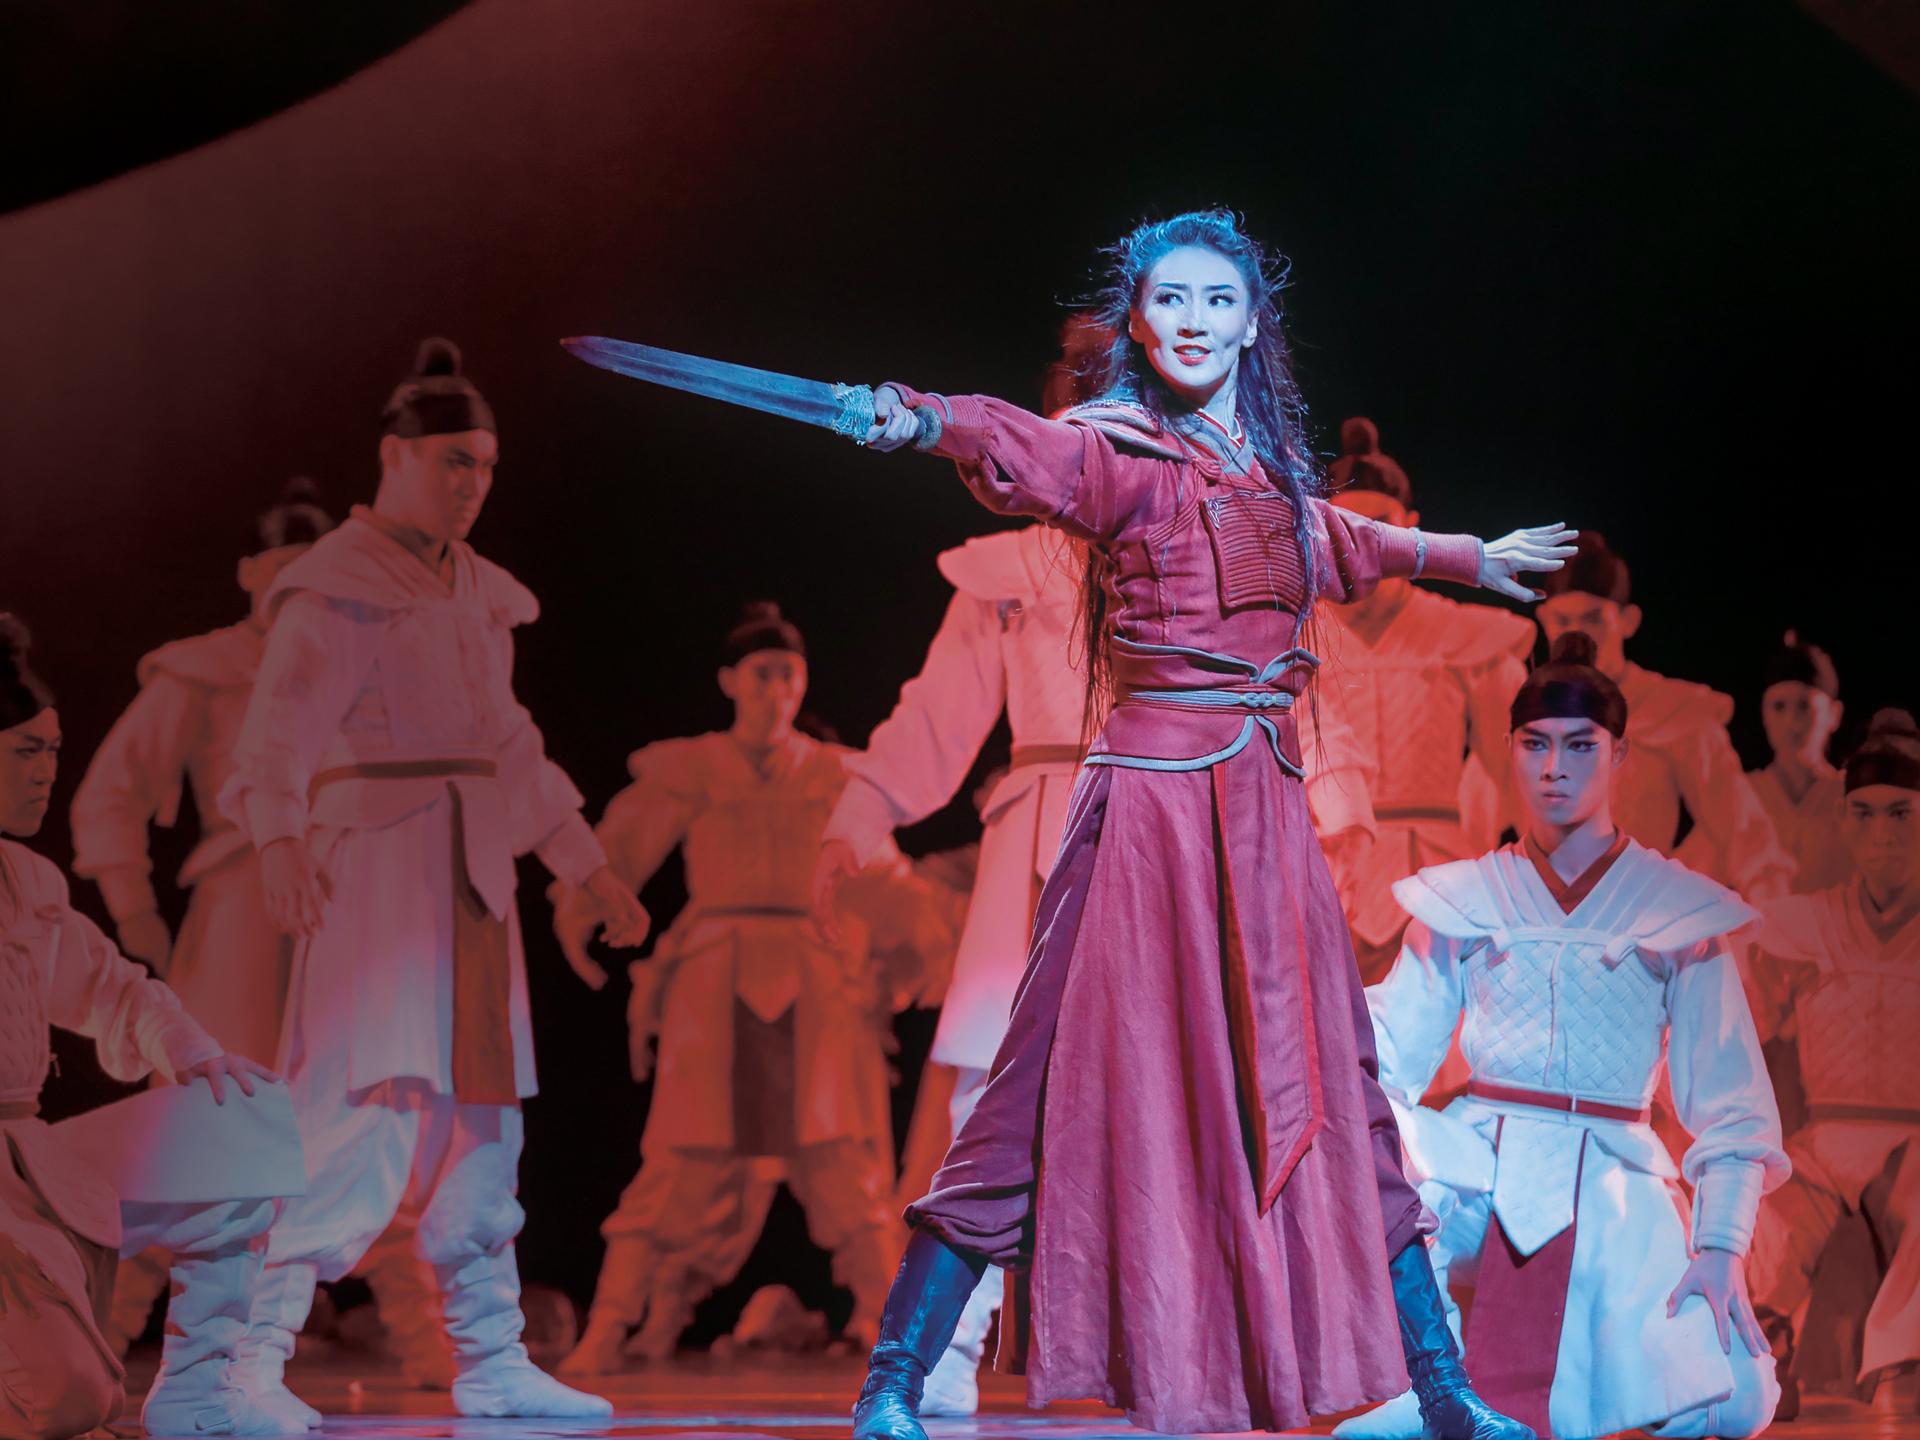 The inaugural Chinese Culture Festival will be held from June to September. Photo shows City Under the Moon - 
Dance Drama: "Mulan" by the Ningbo Performance & Arts Group.